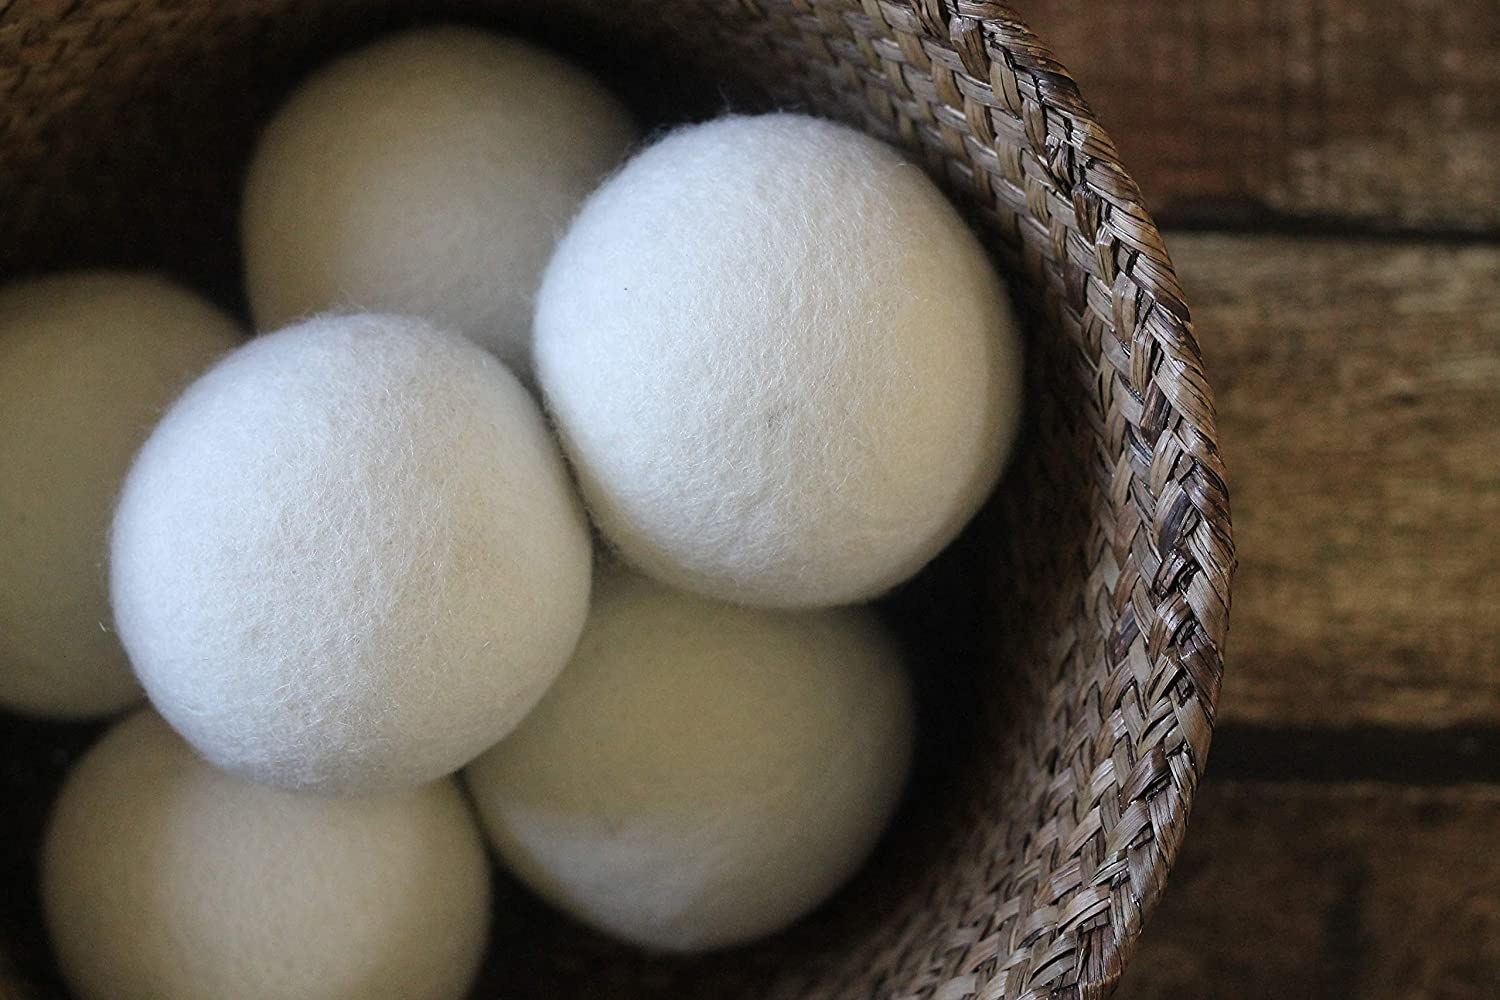 A basket full of six white wooly dryer balls